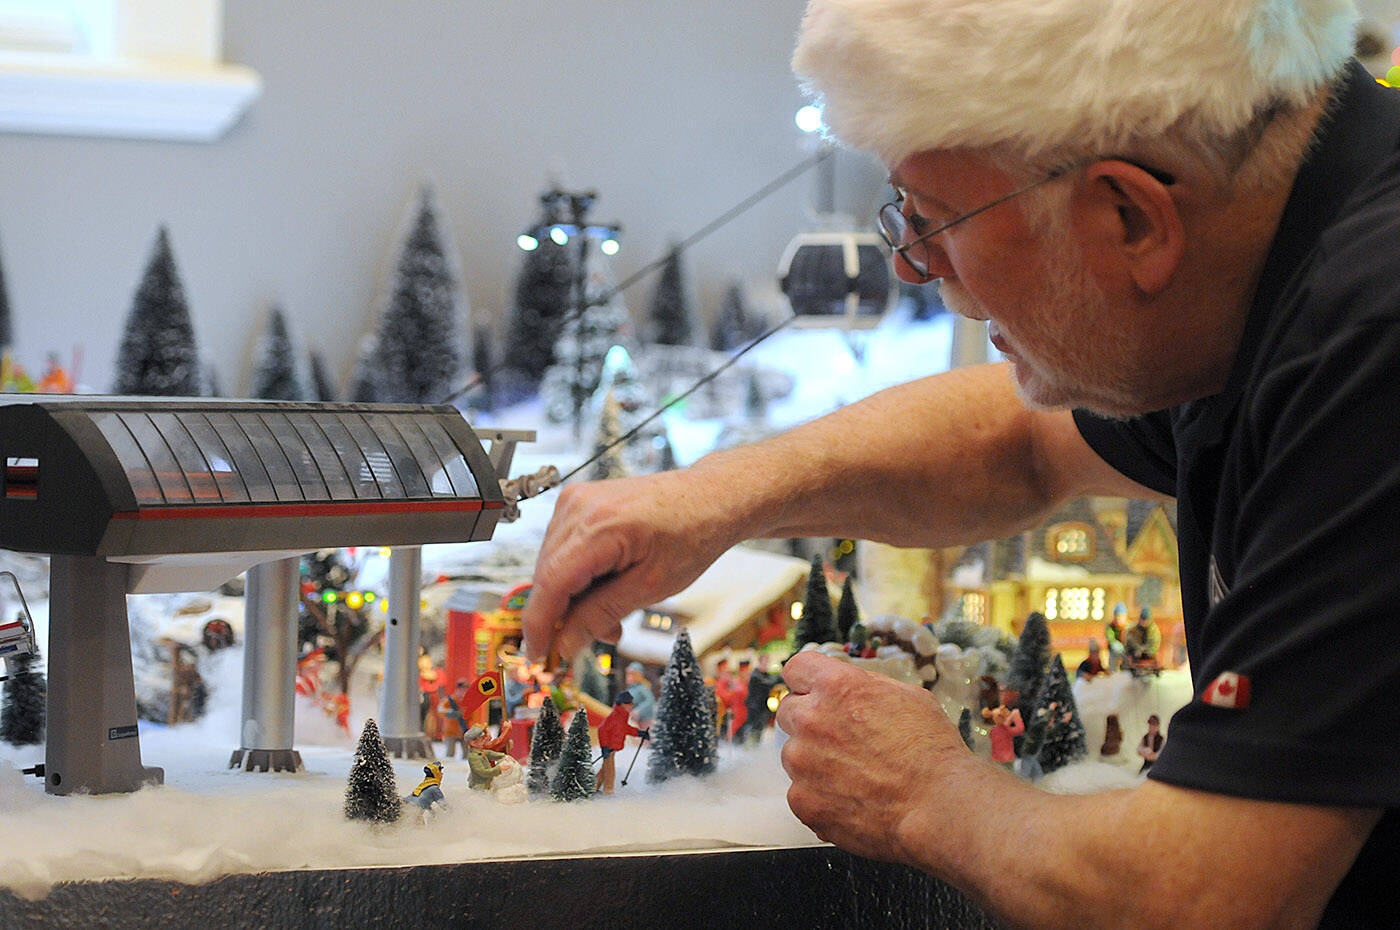 Terry Campbell’s display of Christmas miniatures takes up the entire dining room of his Chilliwack home. He started the display in 2007 but it has been more challenging for him lately as he’s been legally blind since 2018. (Jenna Hauck/ Chilliwack Progress)